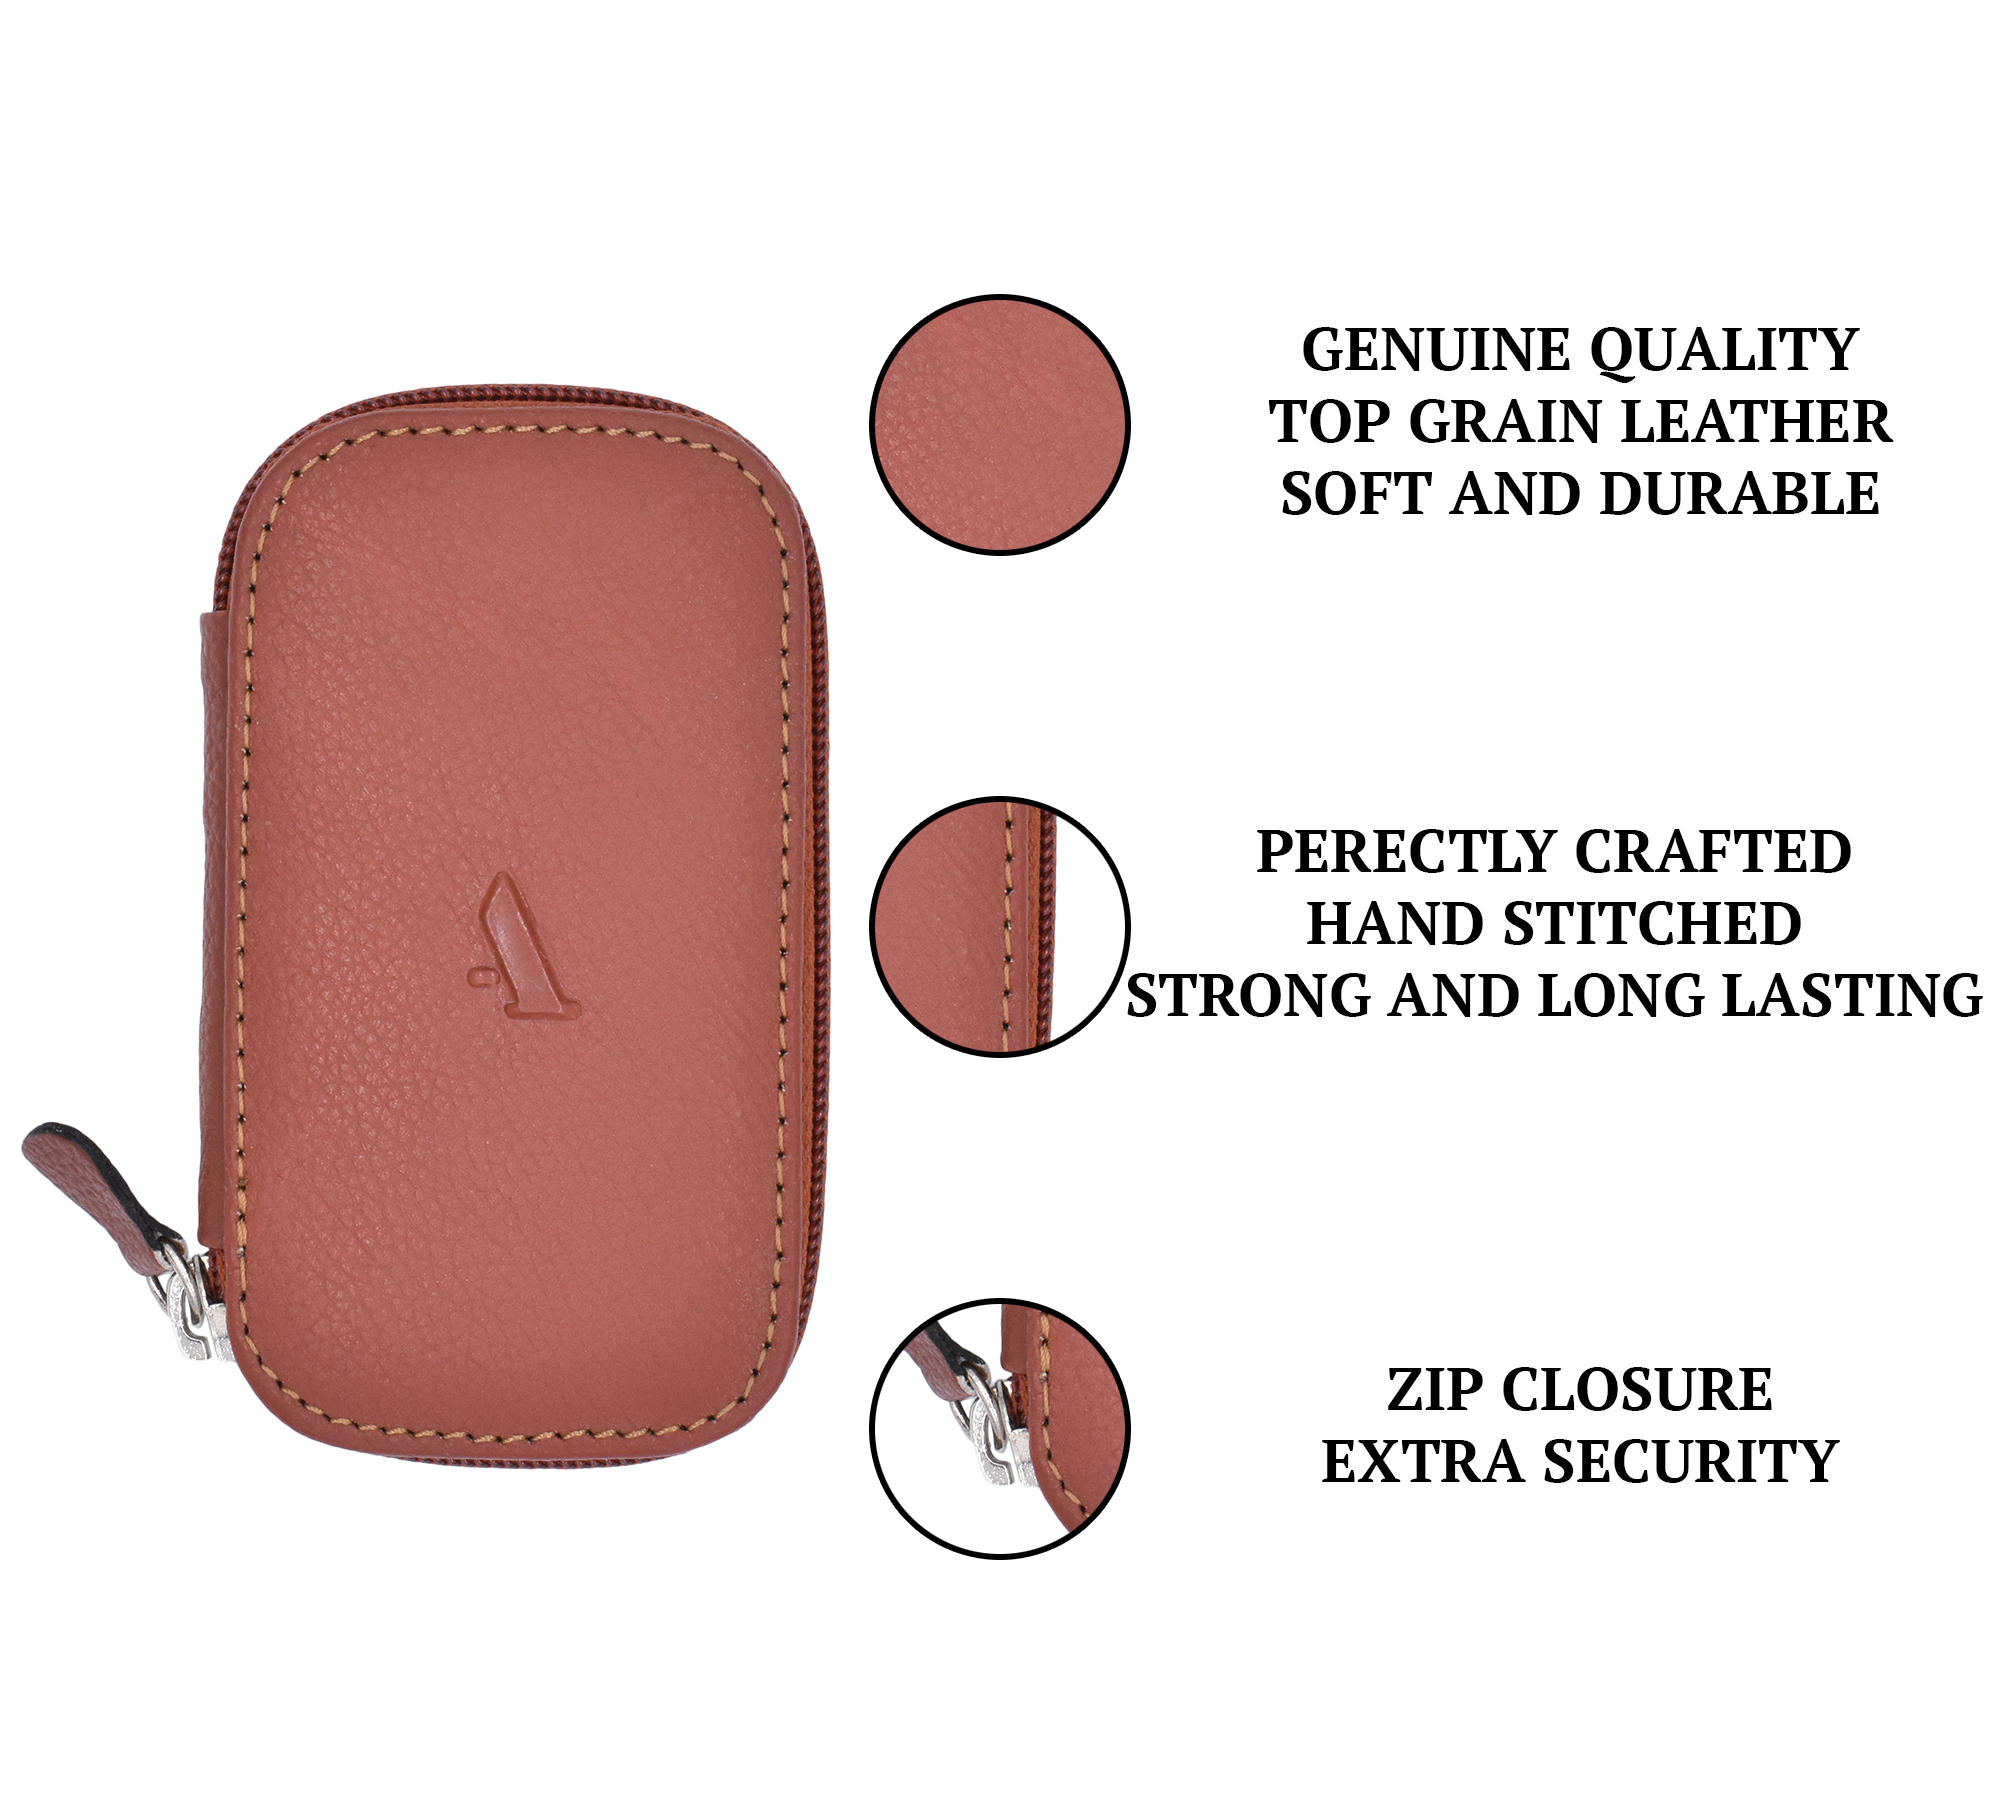 W55--Keycase with zipper closing in Genuine Leather - Tan